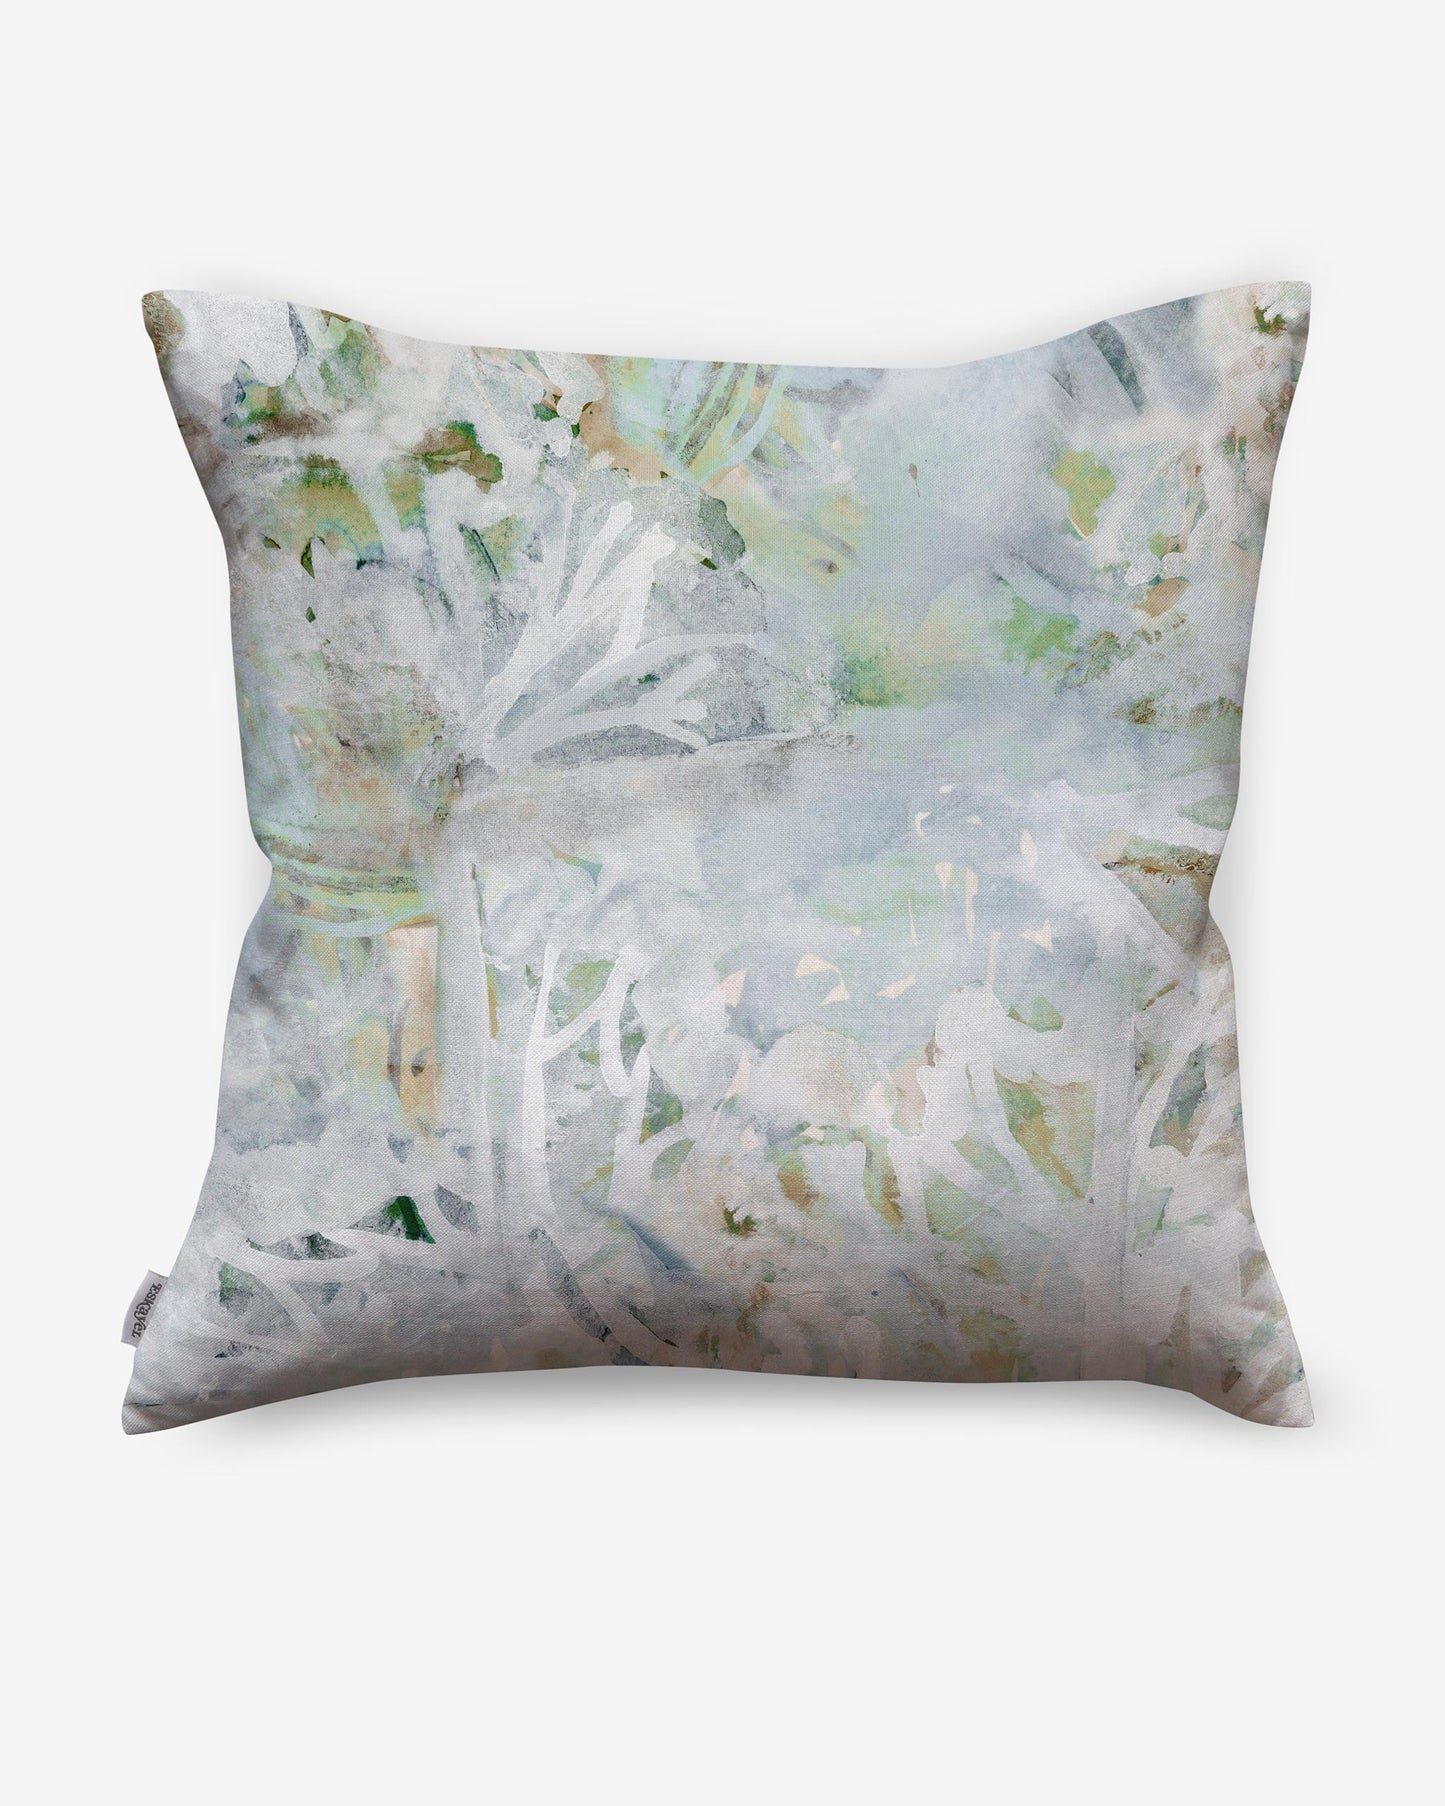 A Cortile Pillow Aqua with a watery blue watercolor painting of flowers and leaves